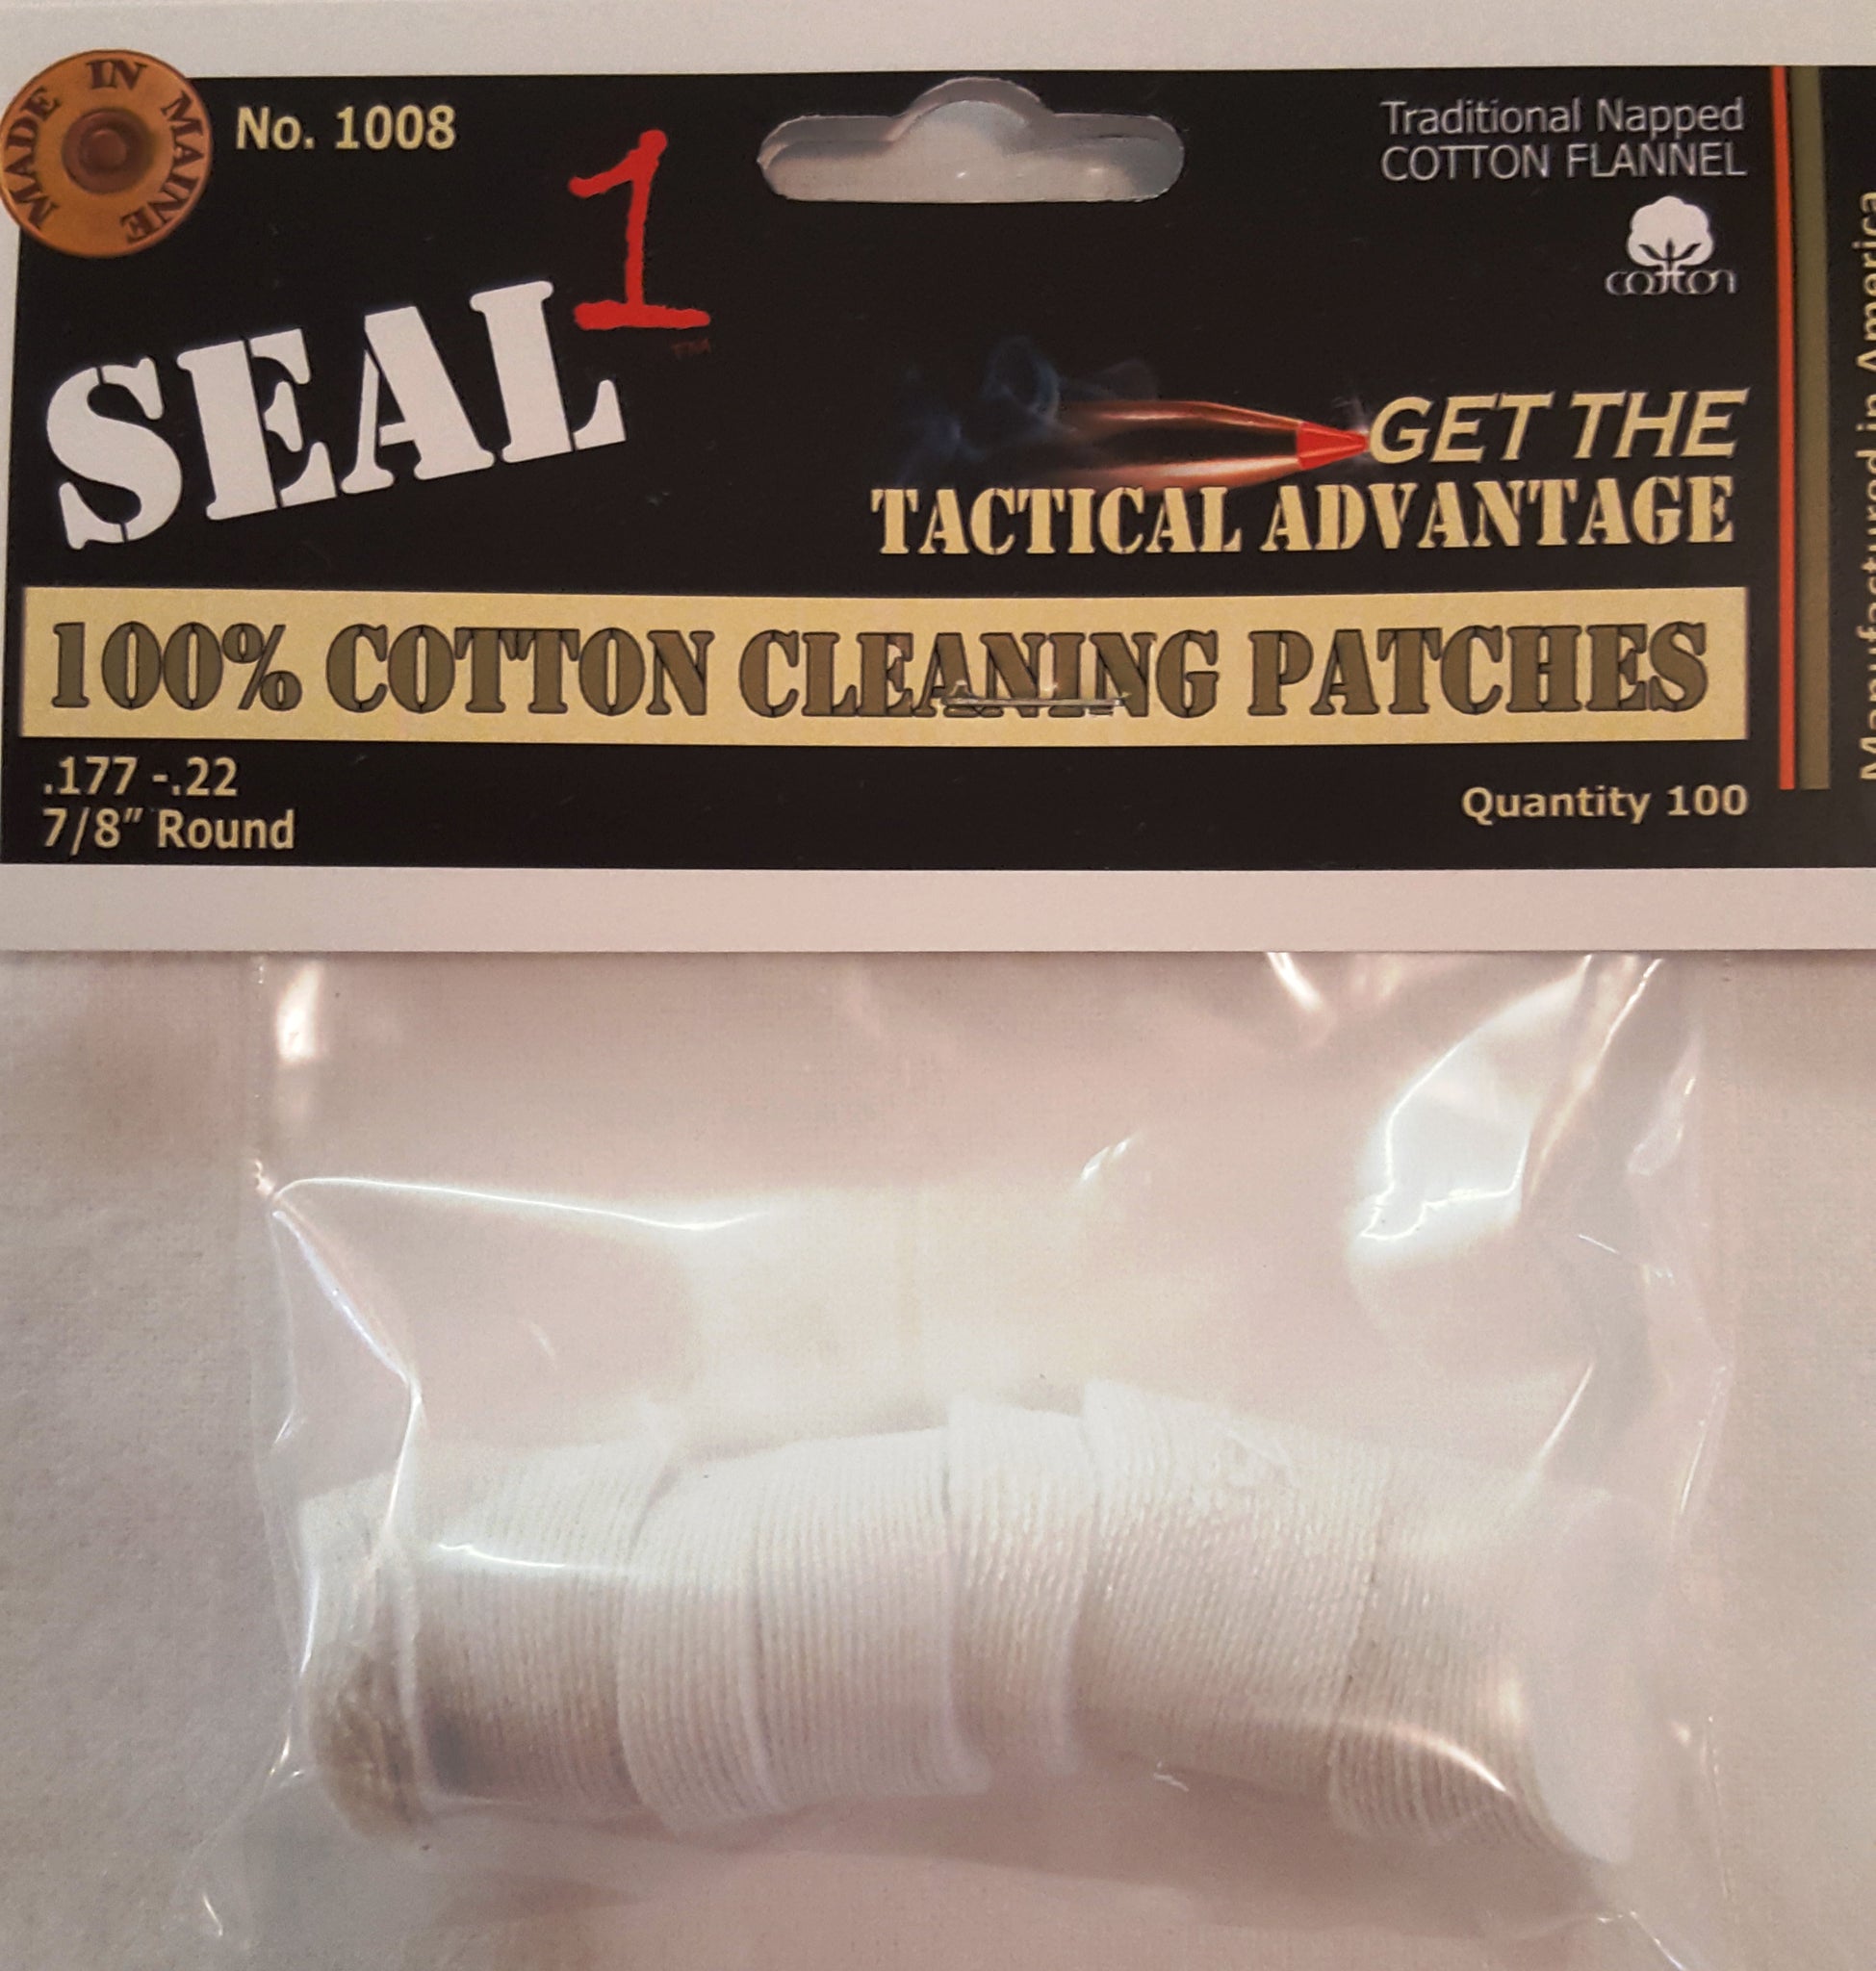 .177 - .22 7/8" 100% Cotton Cleaning Patches Bag of 100